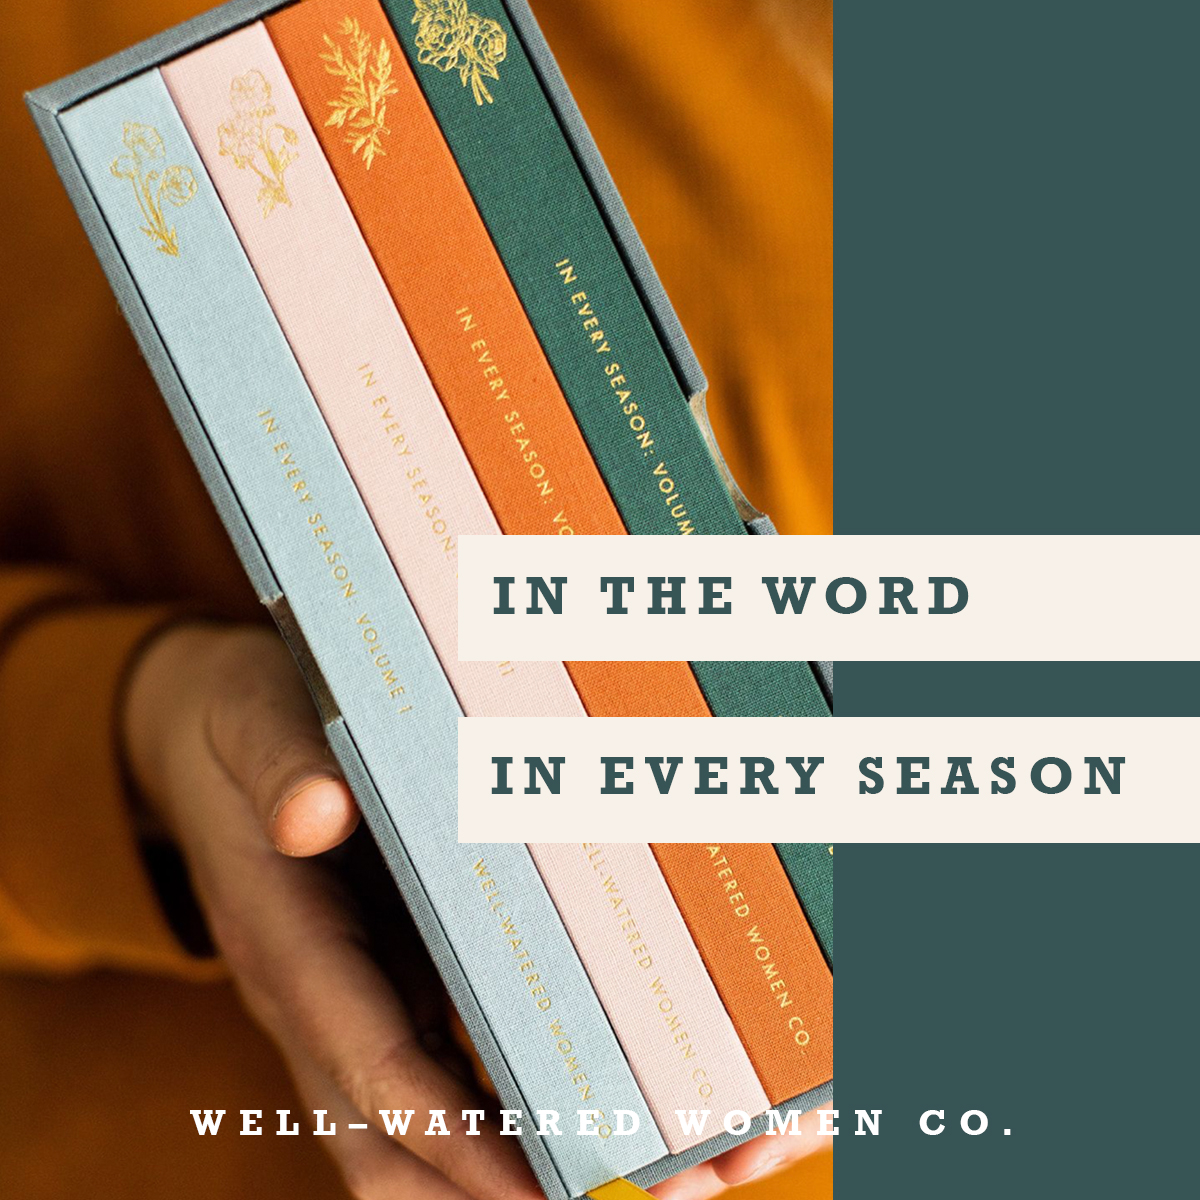 In the Word In Every Season–an Article by Well-Watered Women